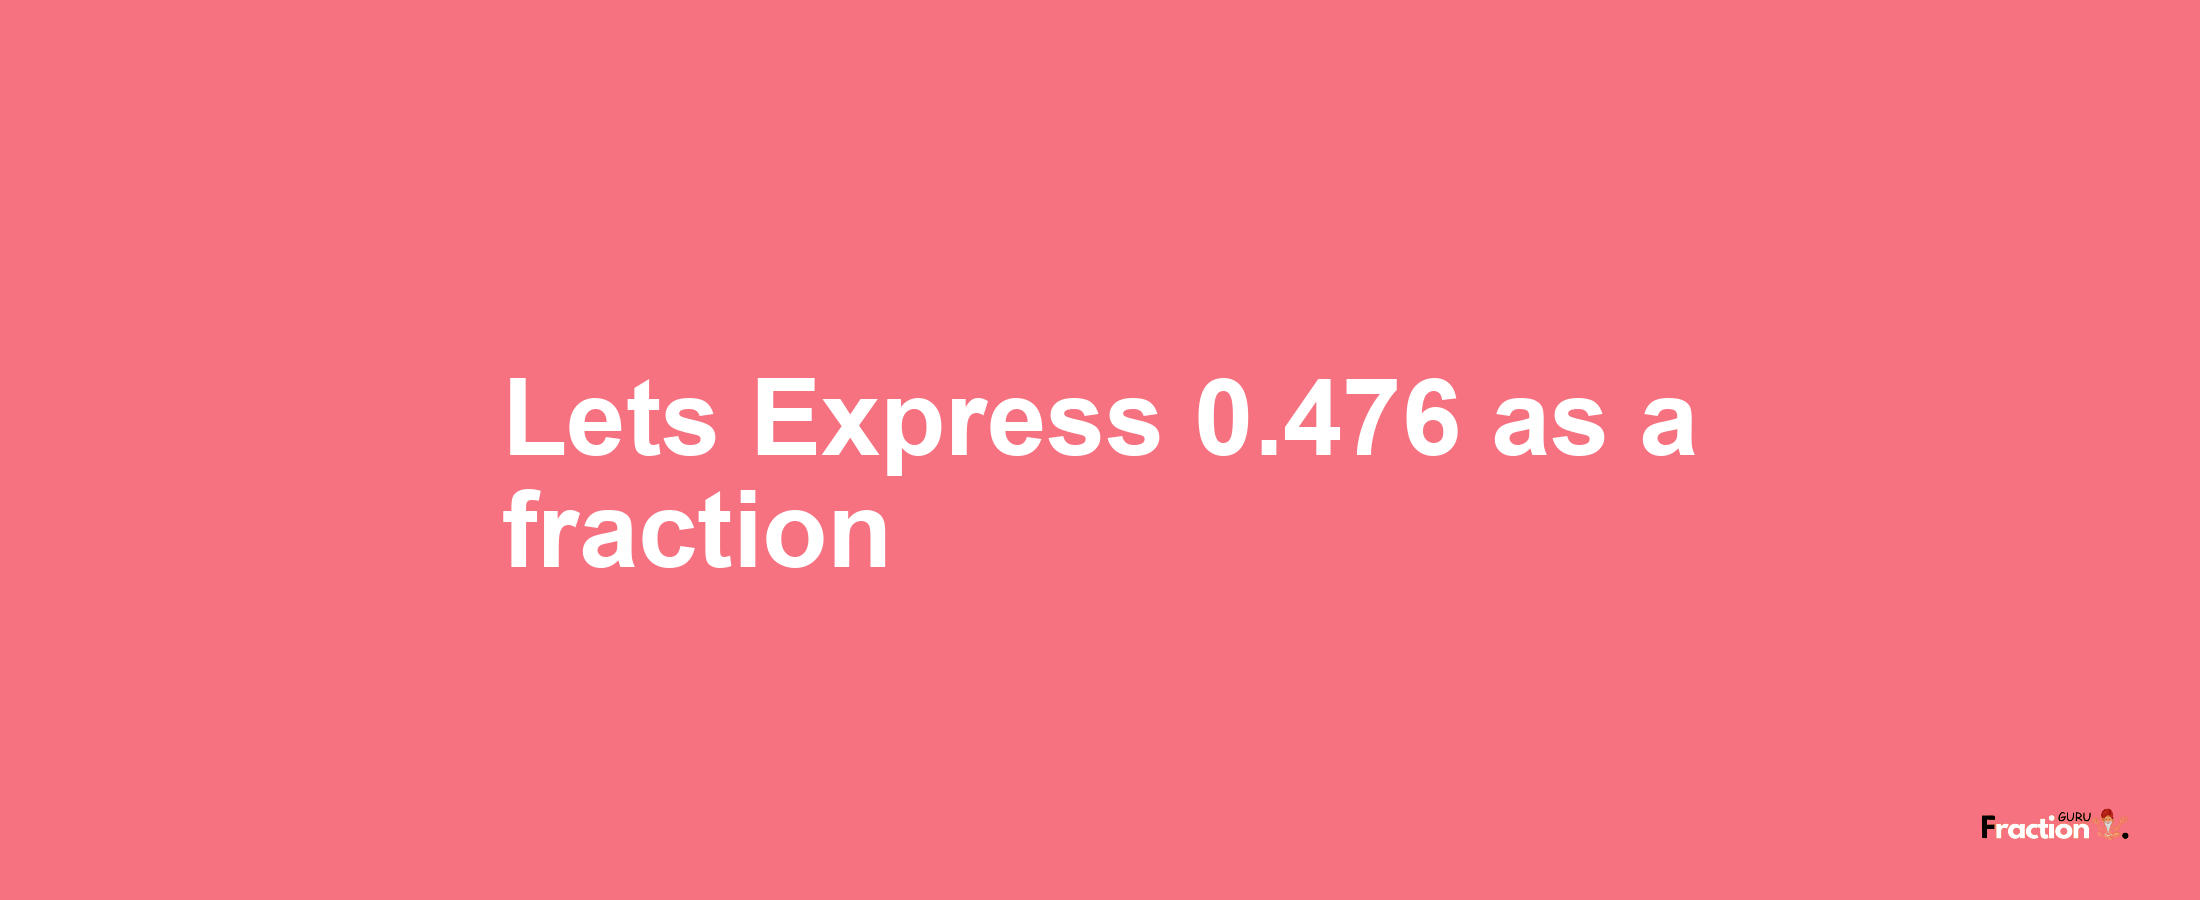 Lets Express 0.476 as afraction